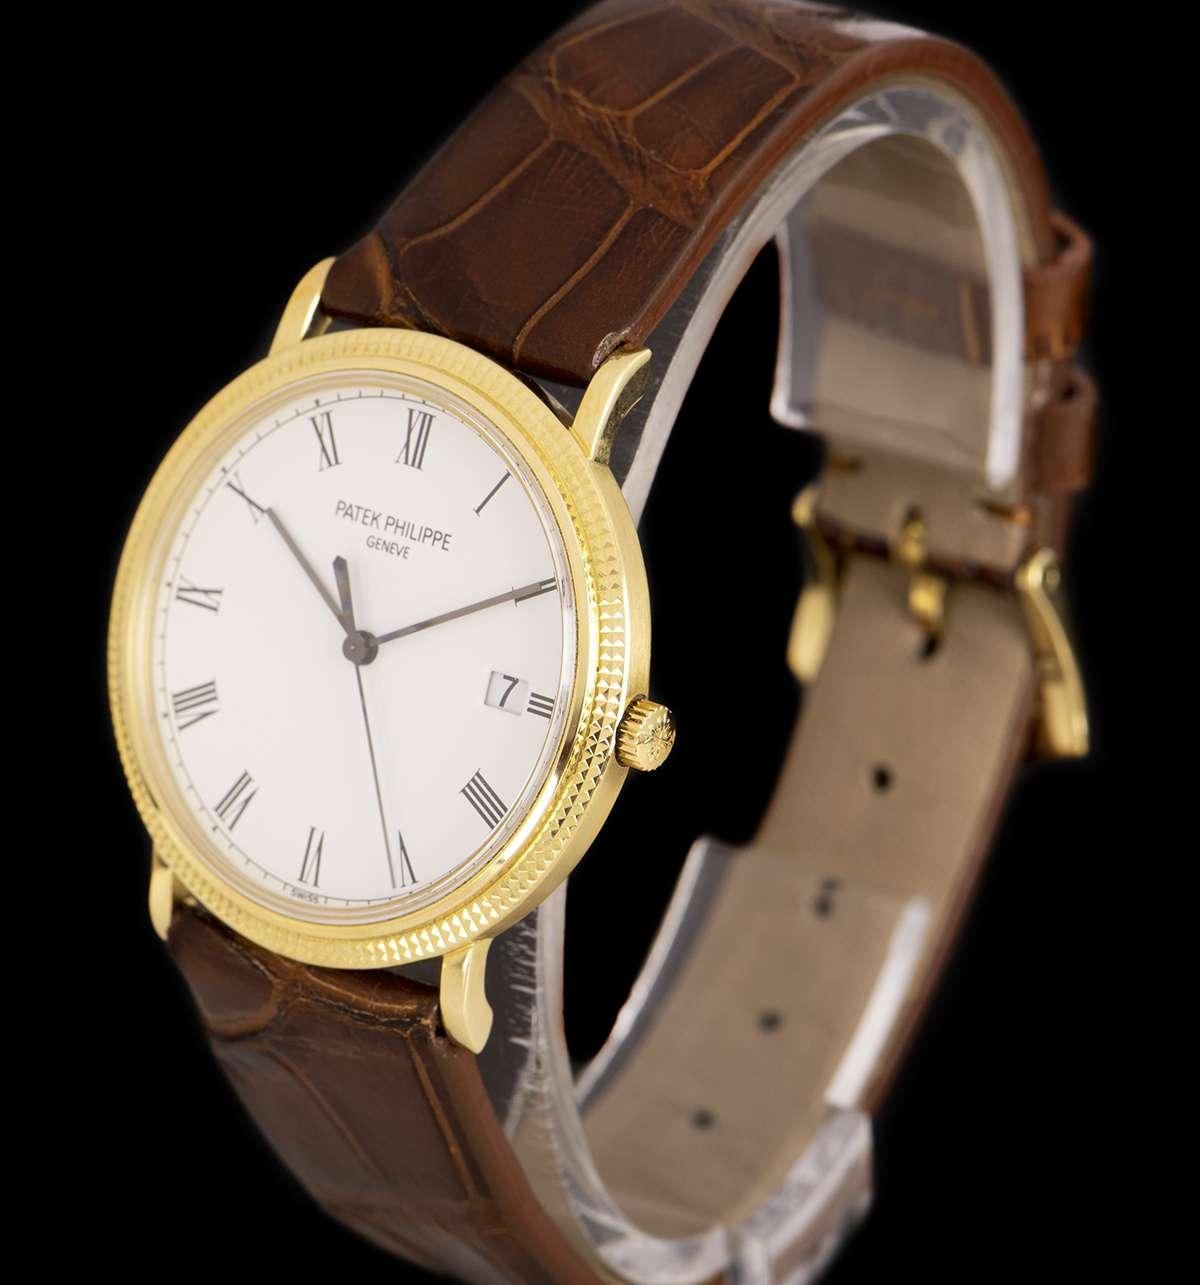 An 18k Yellow Gold Calatrava Gents 33mm Wristwatch, white porcelaine dial with roman numerals, date at 3 0'clock, a fixed 18k yellow gold hobnail bezel, a brown leather strap (not by Patek Philippe) with an original 18k yellow gold pin buckle,